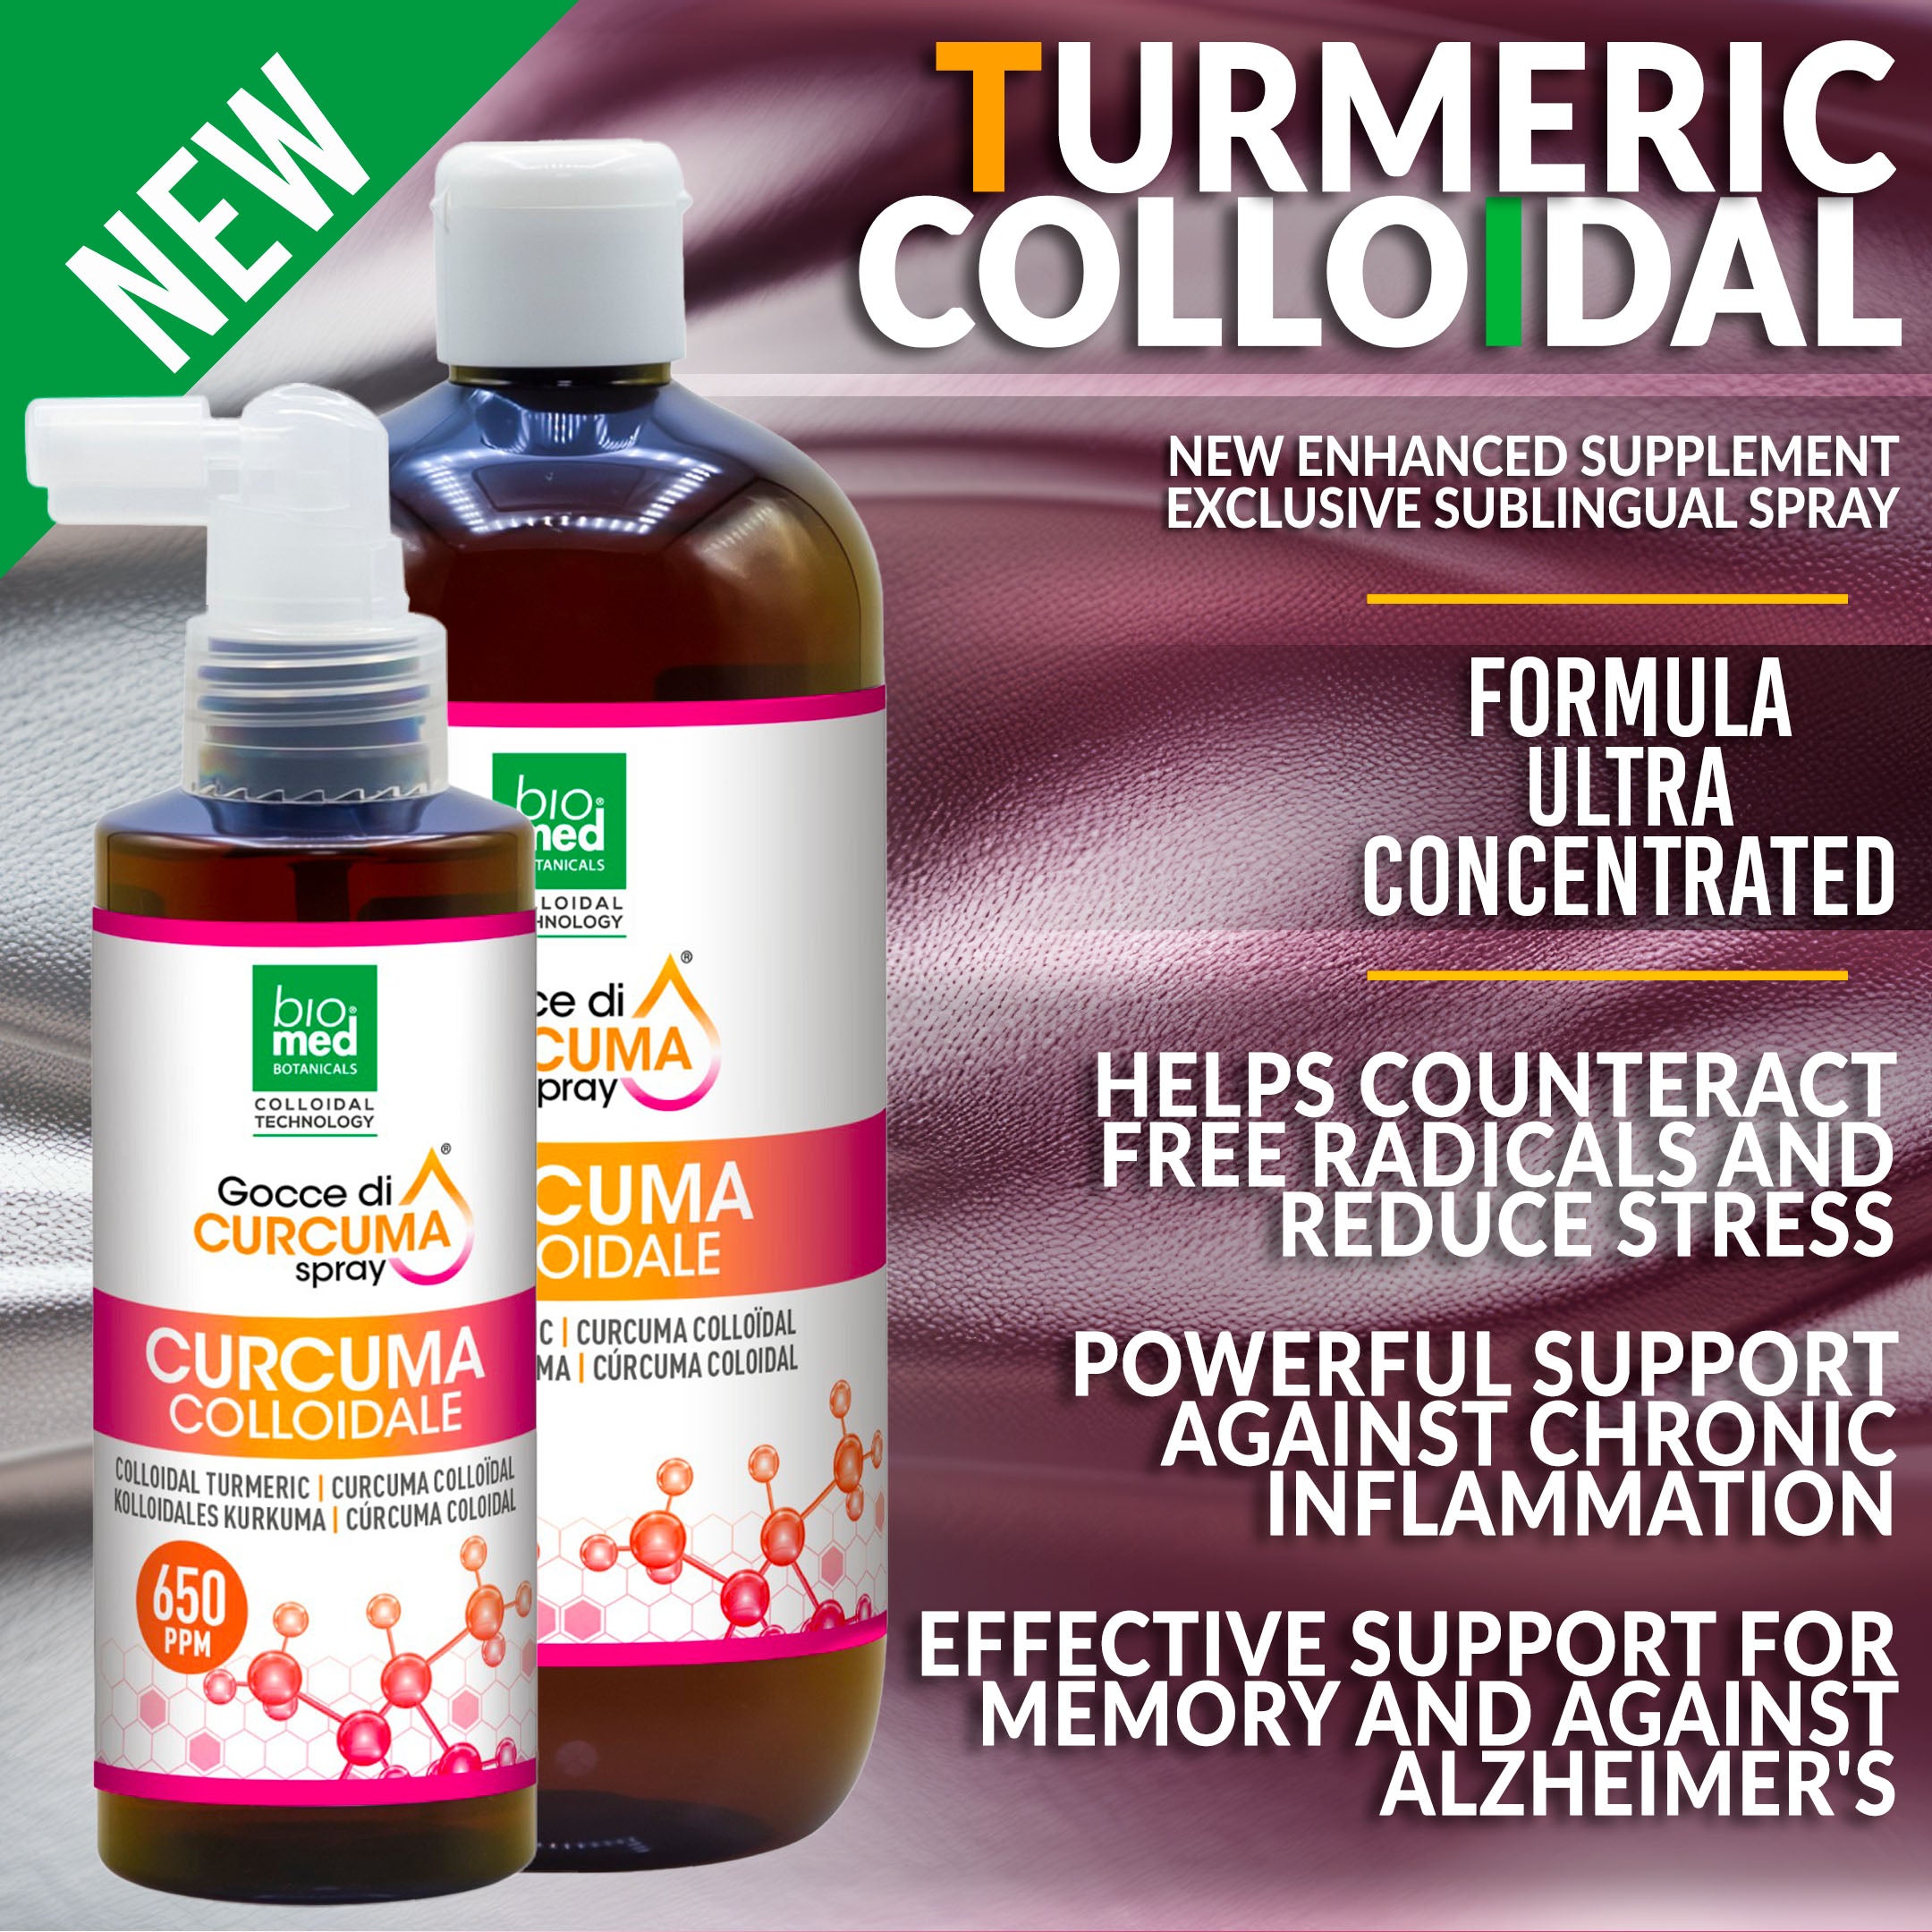 NEW ULTRA-CONCENTRATED COLLOIDAL TURMERIC SPRAY - BIOMED - 650ppm